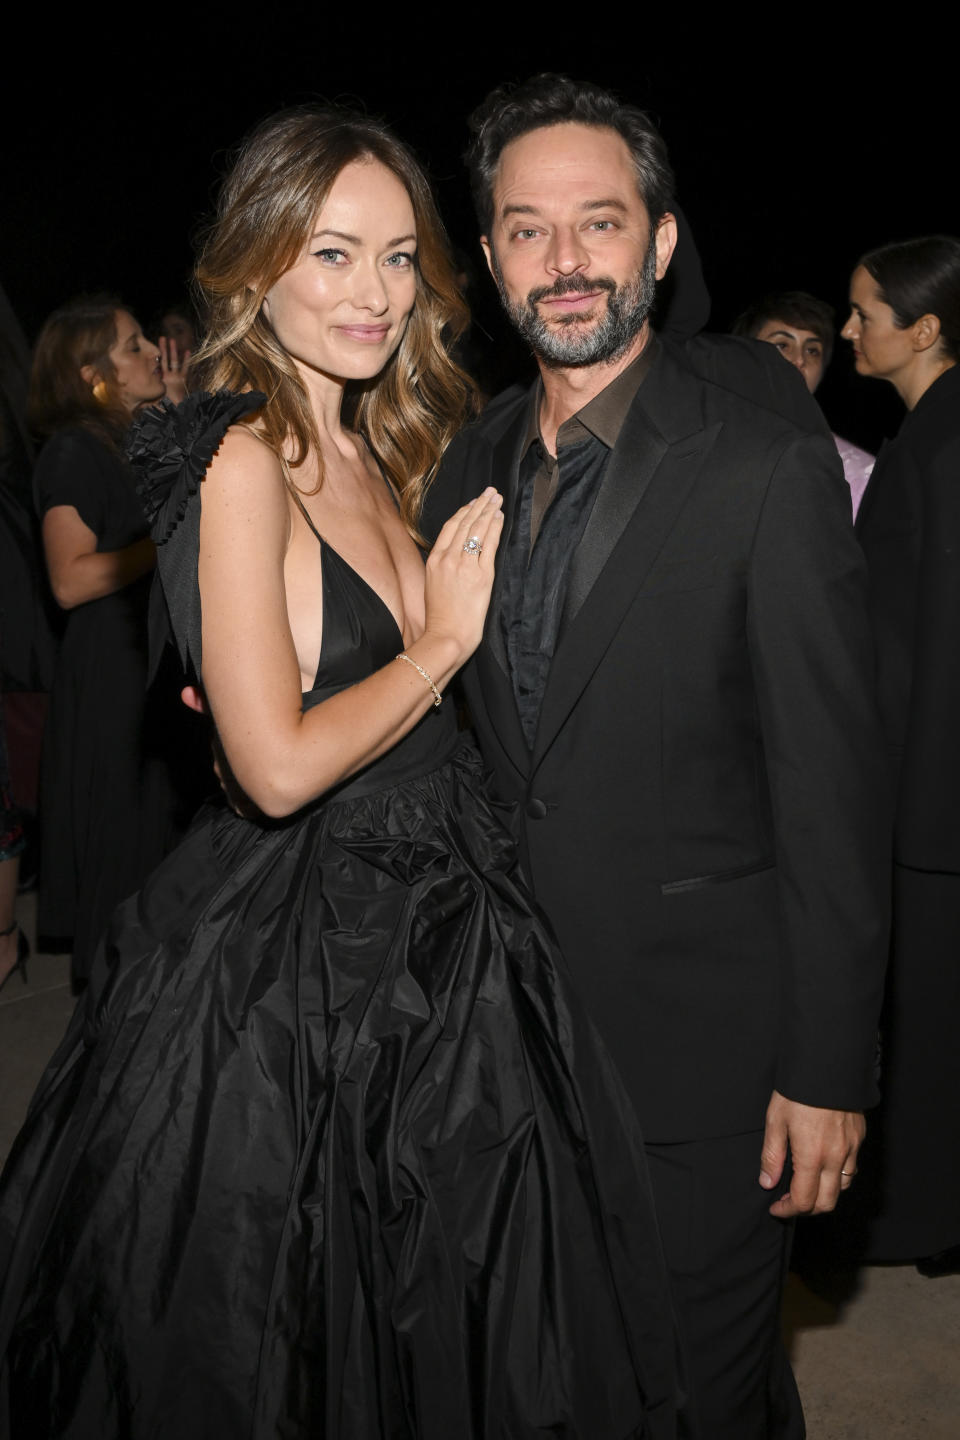 Olivia Wilde and Nick Kroll at Elle Women In Hollywood held at The Getty Center on October 17, 2022 in Los Angeles, California.